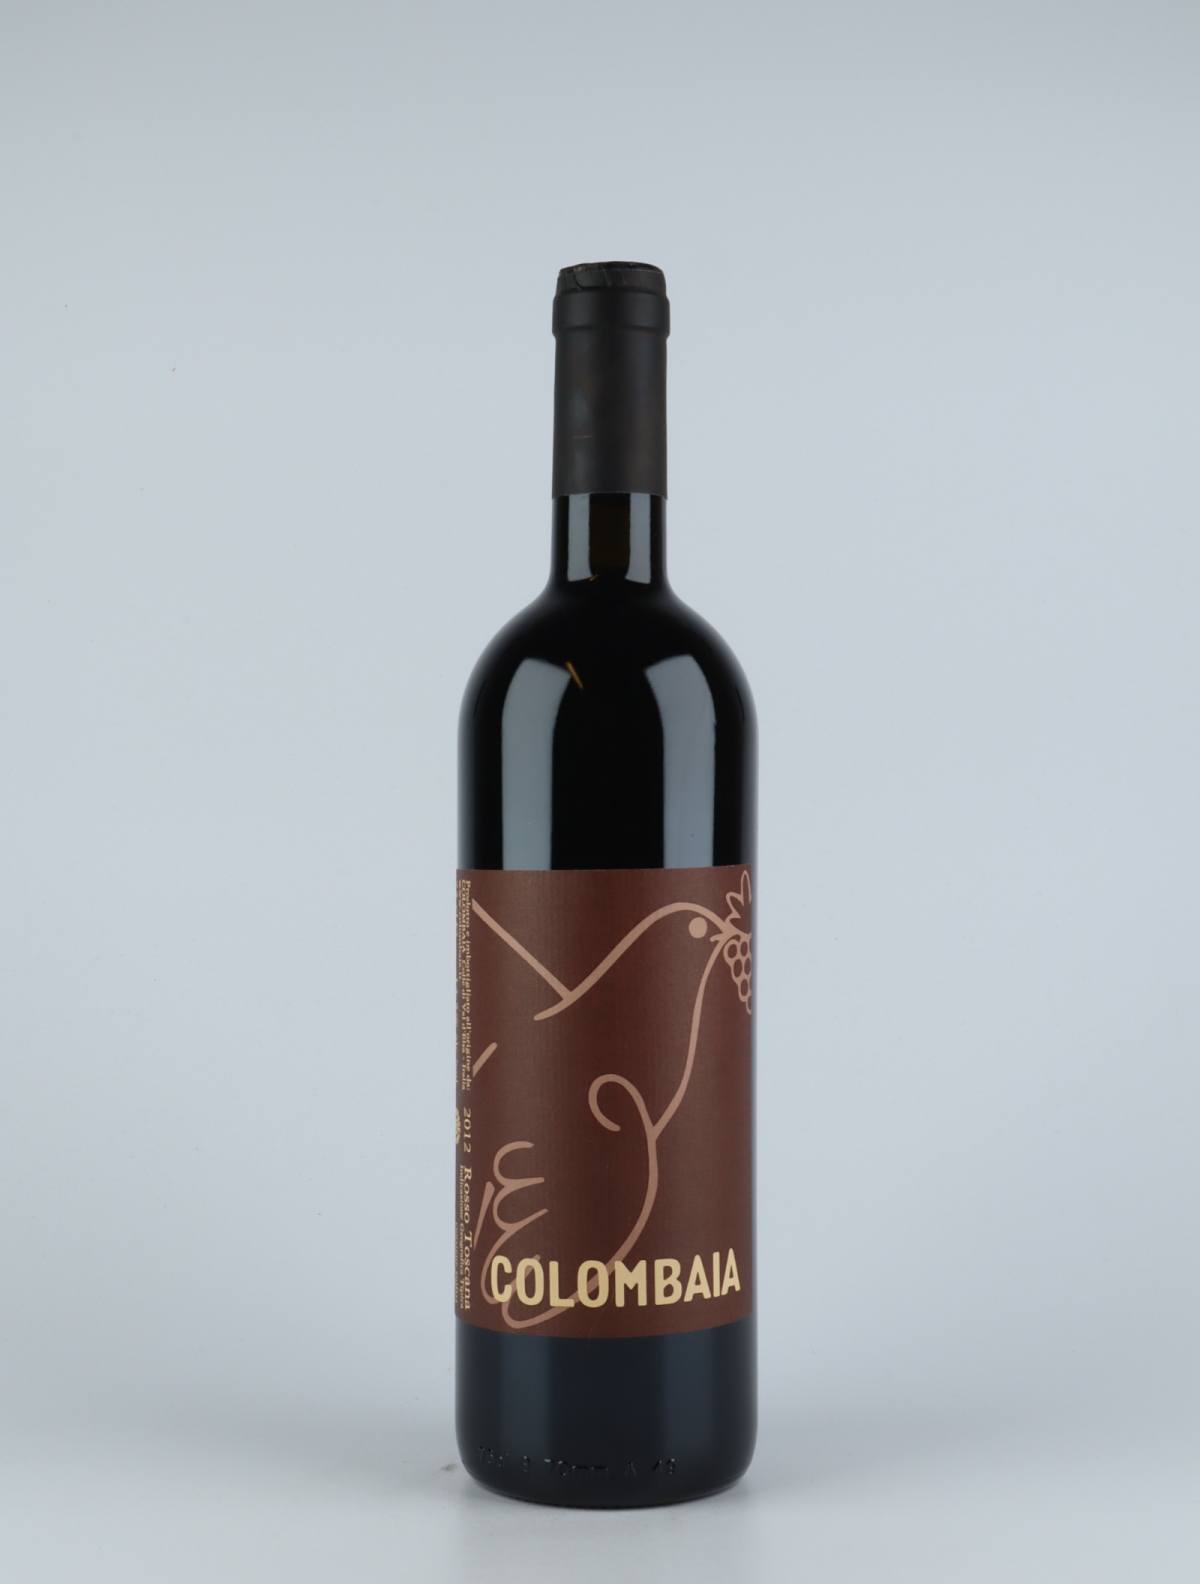 A bottle 2012 Vigna Vecchia Red wine from Colombaia, Tuscany in Italy